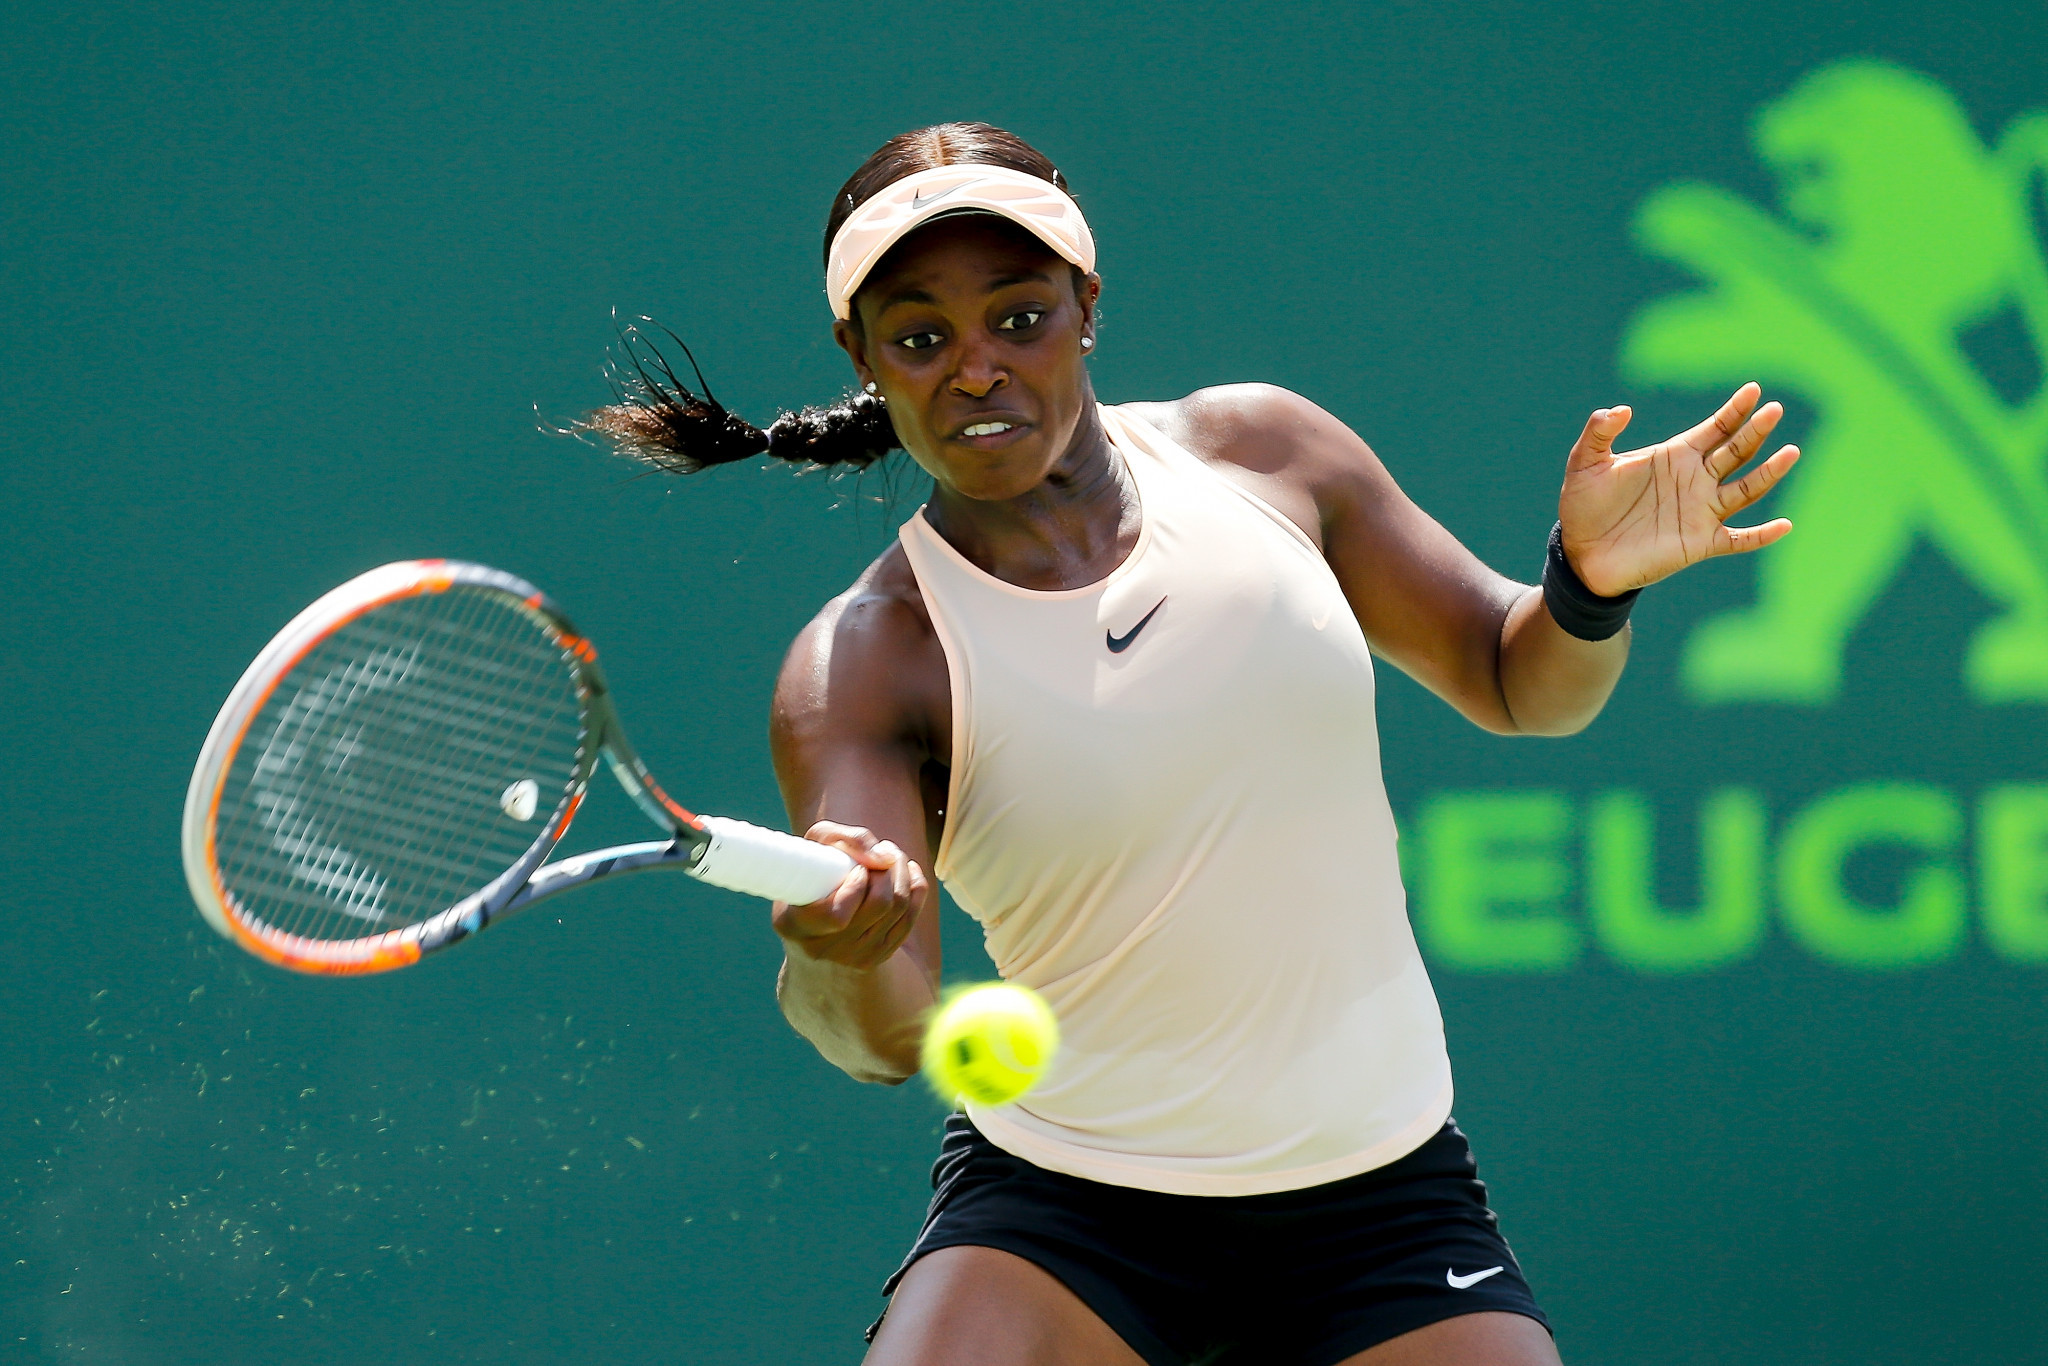 America's Sloane Stephens will enter the world's top 10 following her Miami Open triumph ©Getty Images